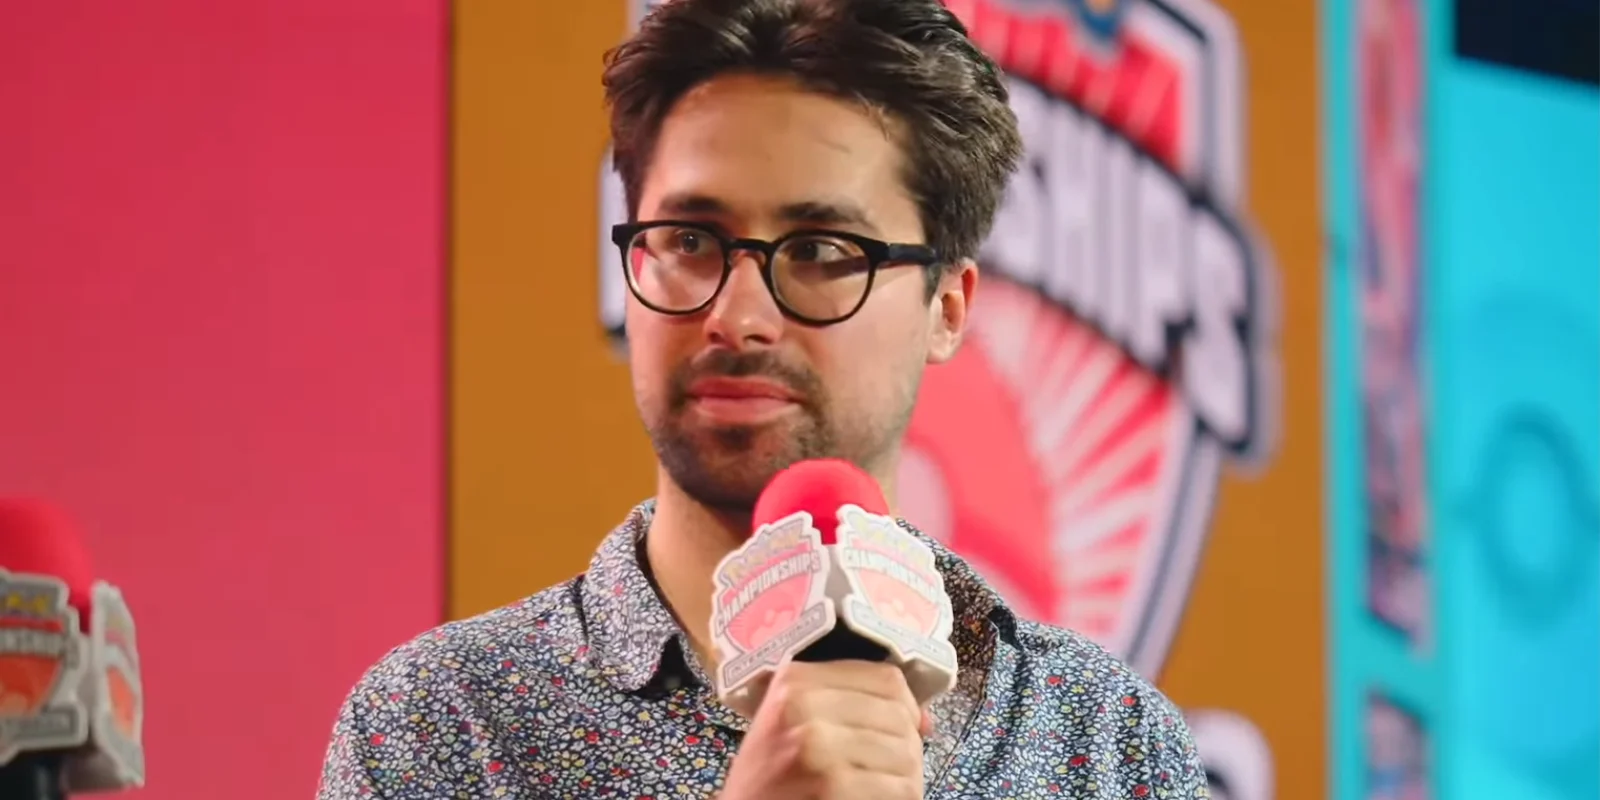 Pokémon World Champion Wolfe Glick shares ‘incredibly unjust’ truth about the VGC community